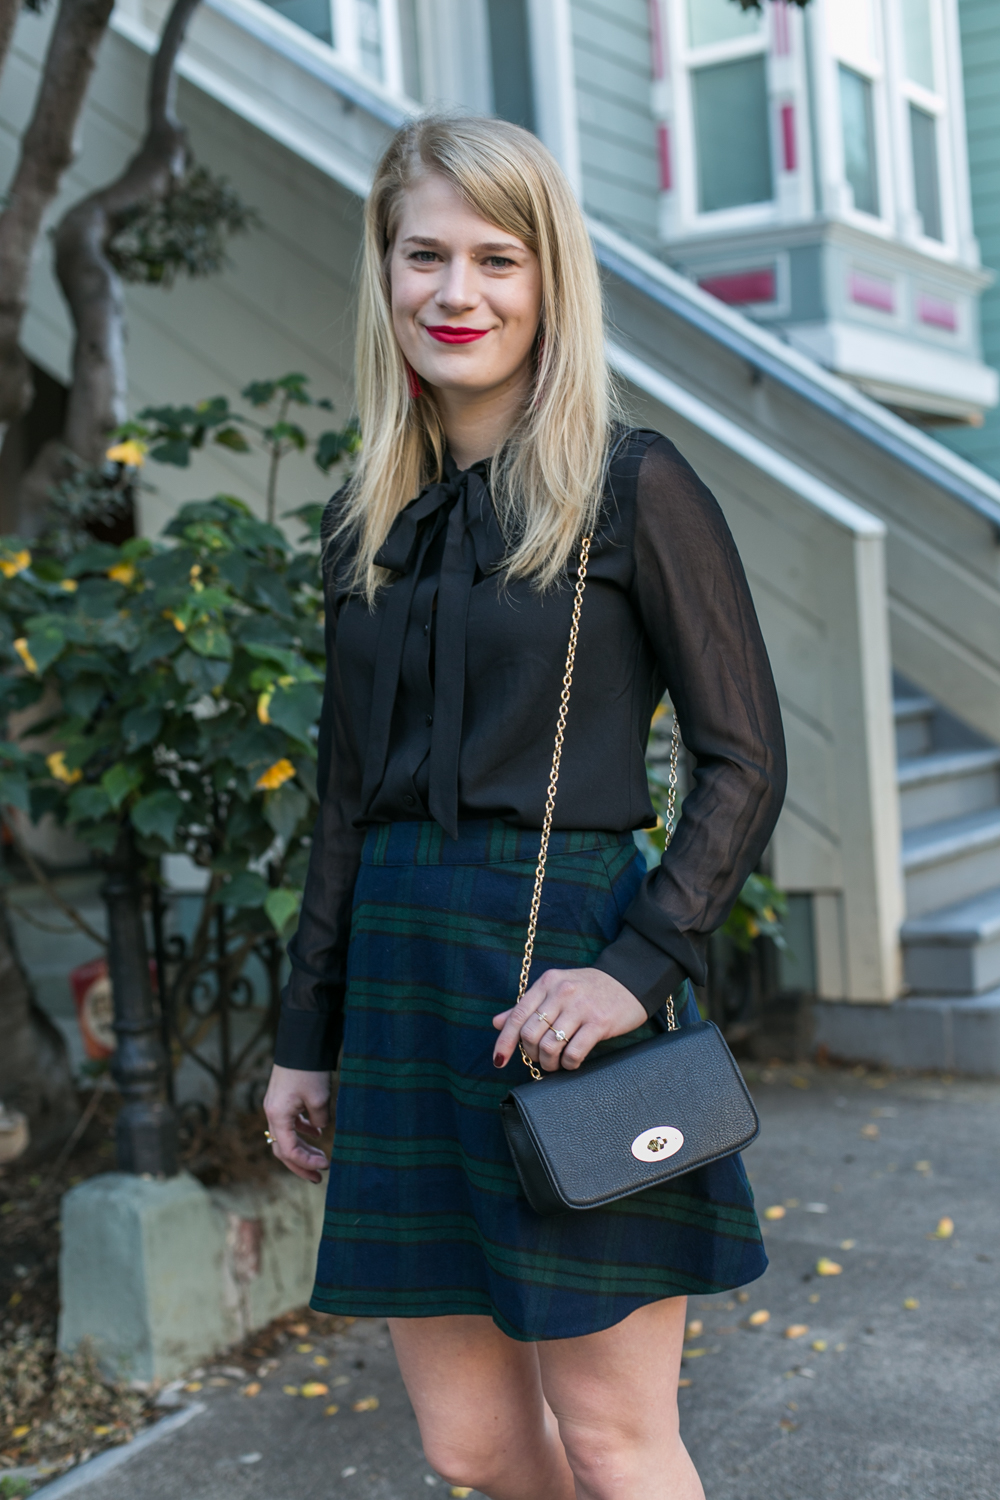 Old Navy Plaid Skirt for Fall with Black Blouse and M. Gemi Patent Pumps.